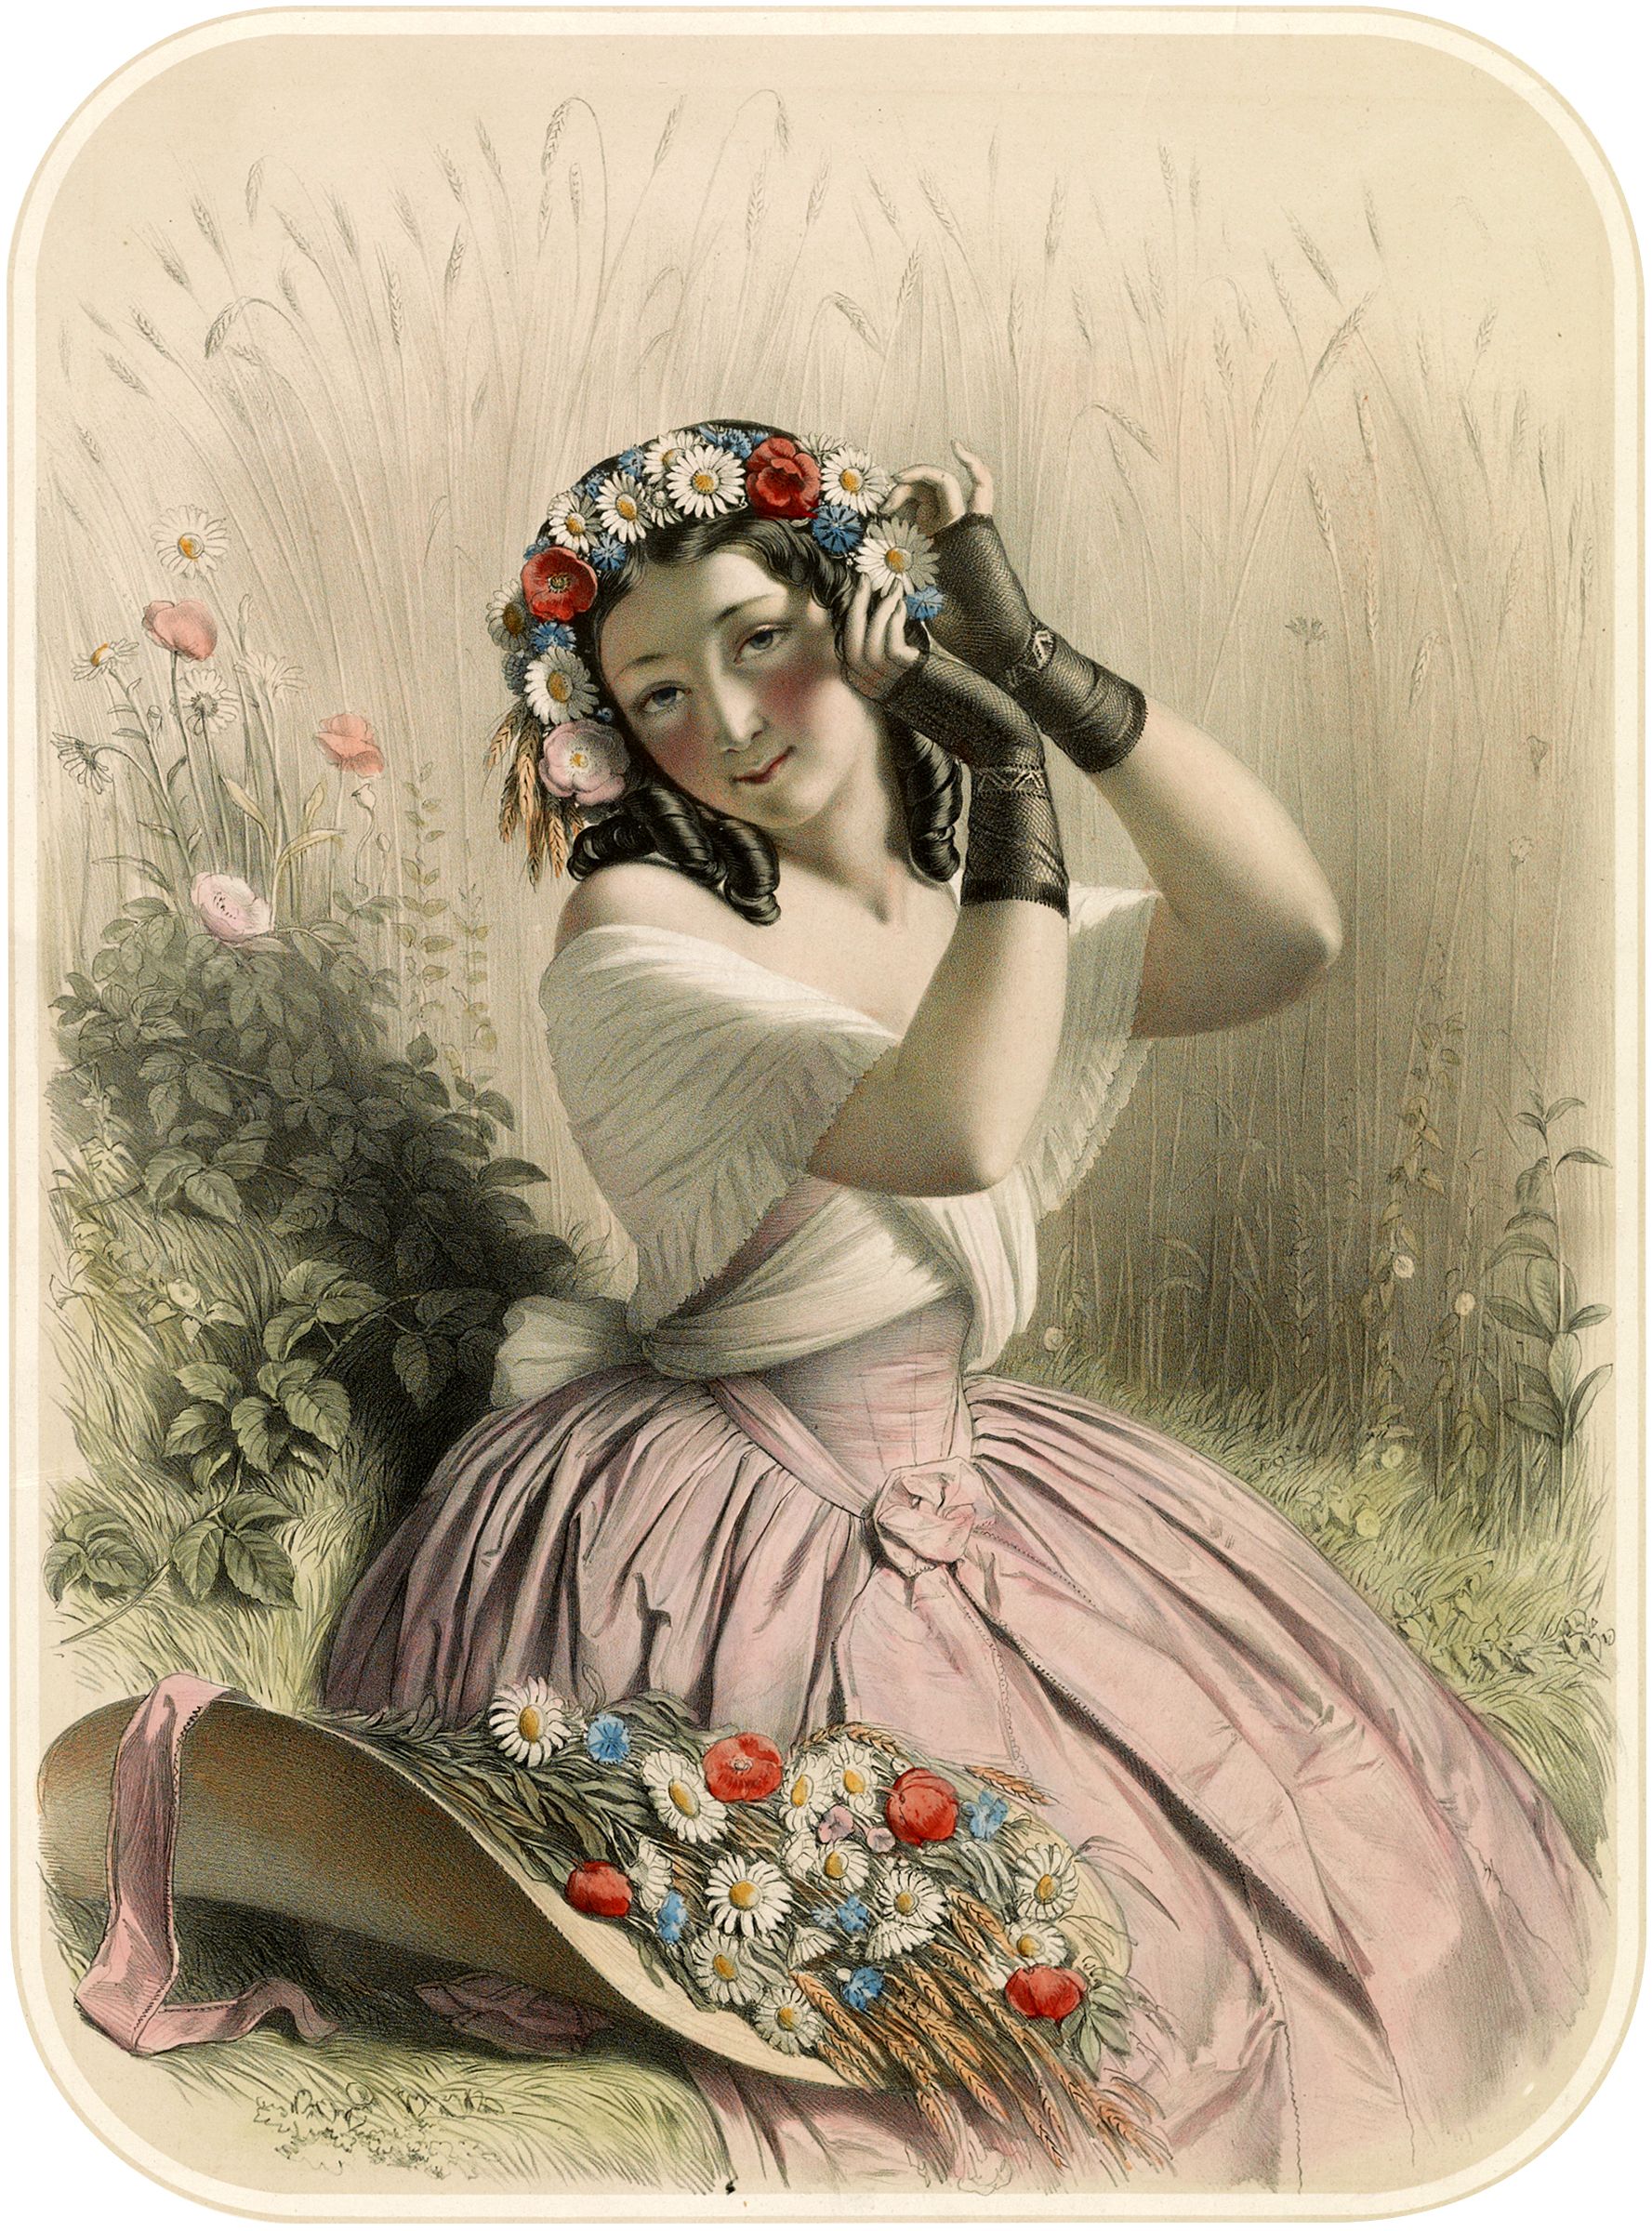 Charming Vintage Girl Wearing a Flower Crown Image! Graphics